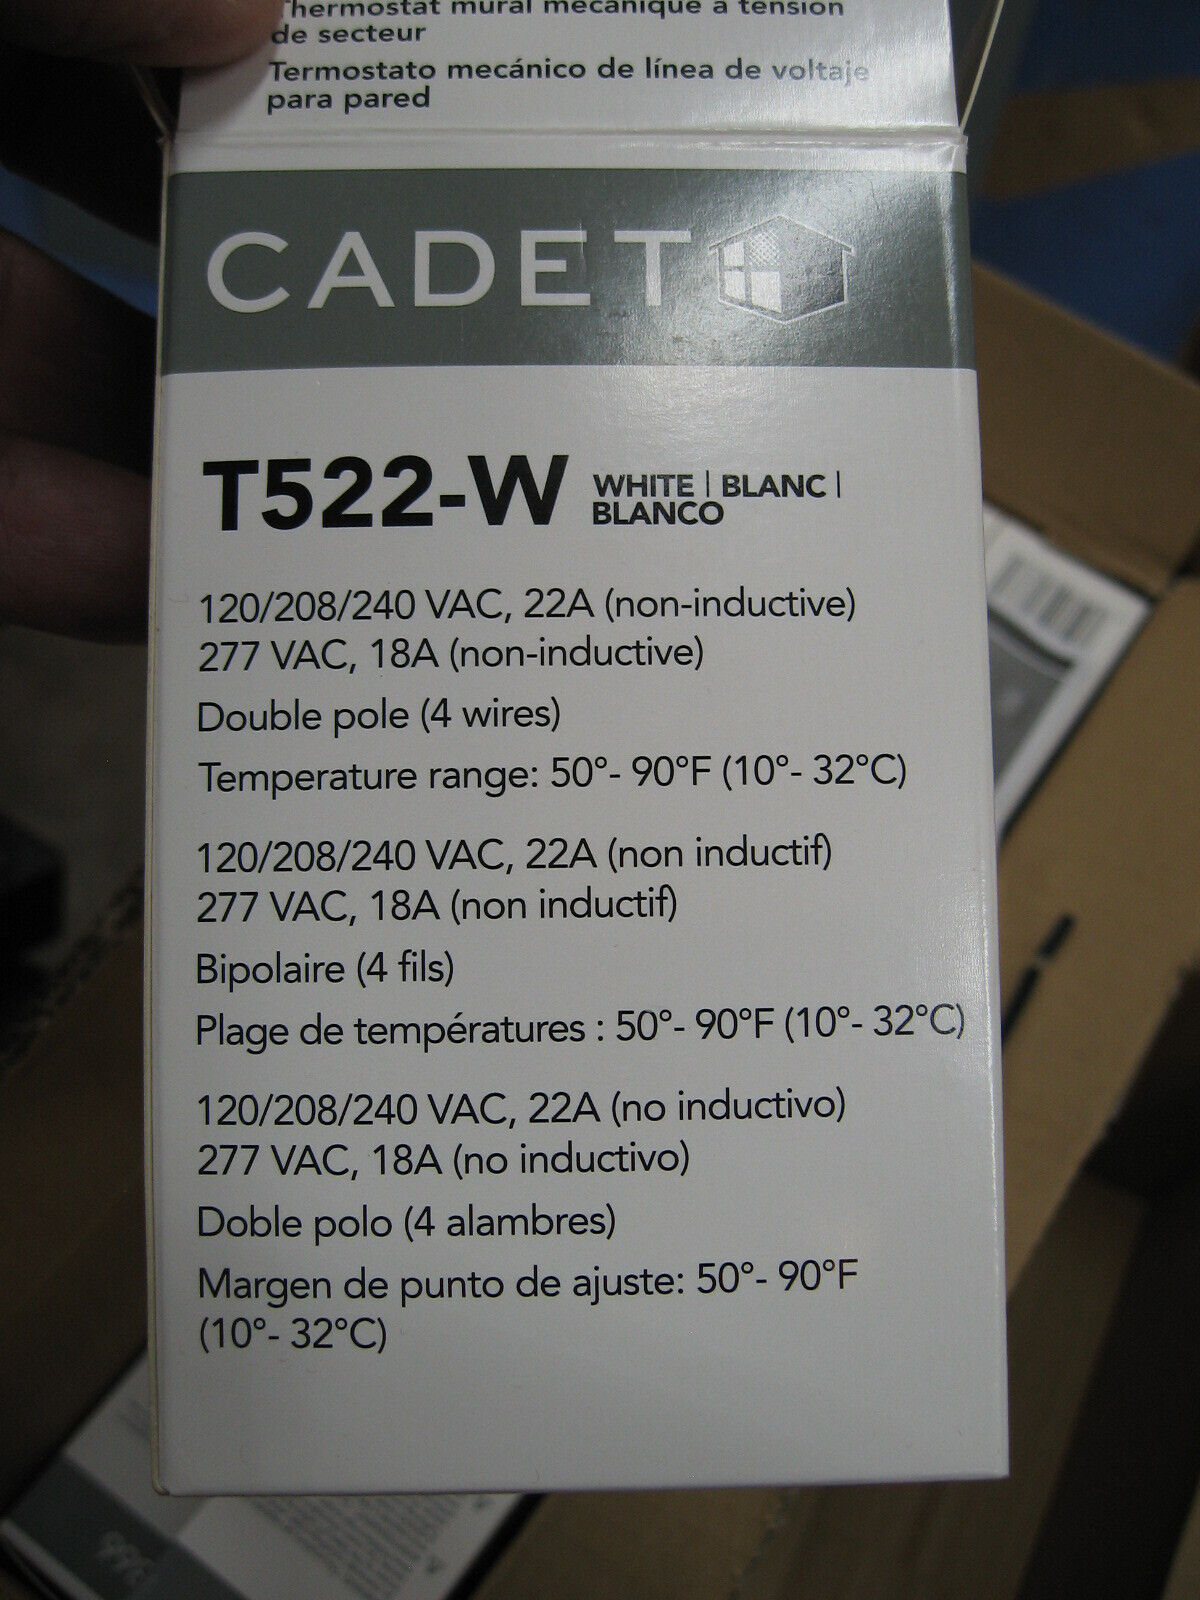 NEW (Case of 12) - Cadet T522-W Double Pole 4-Wire Mechanical Wall Thermostat -